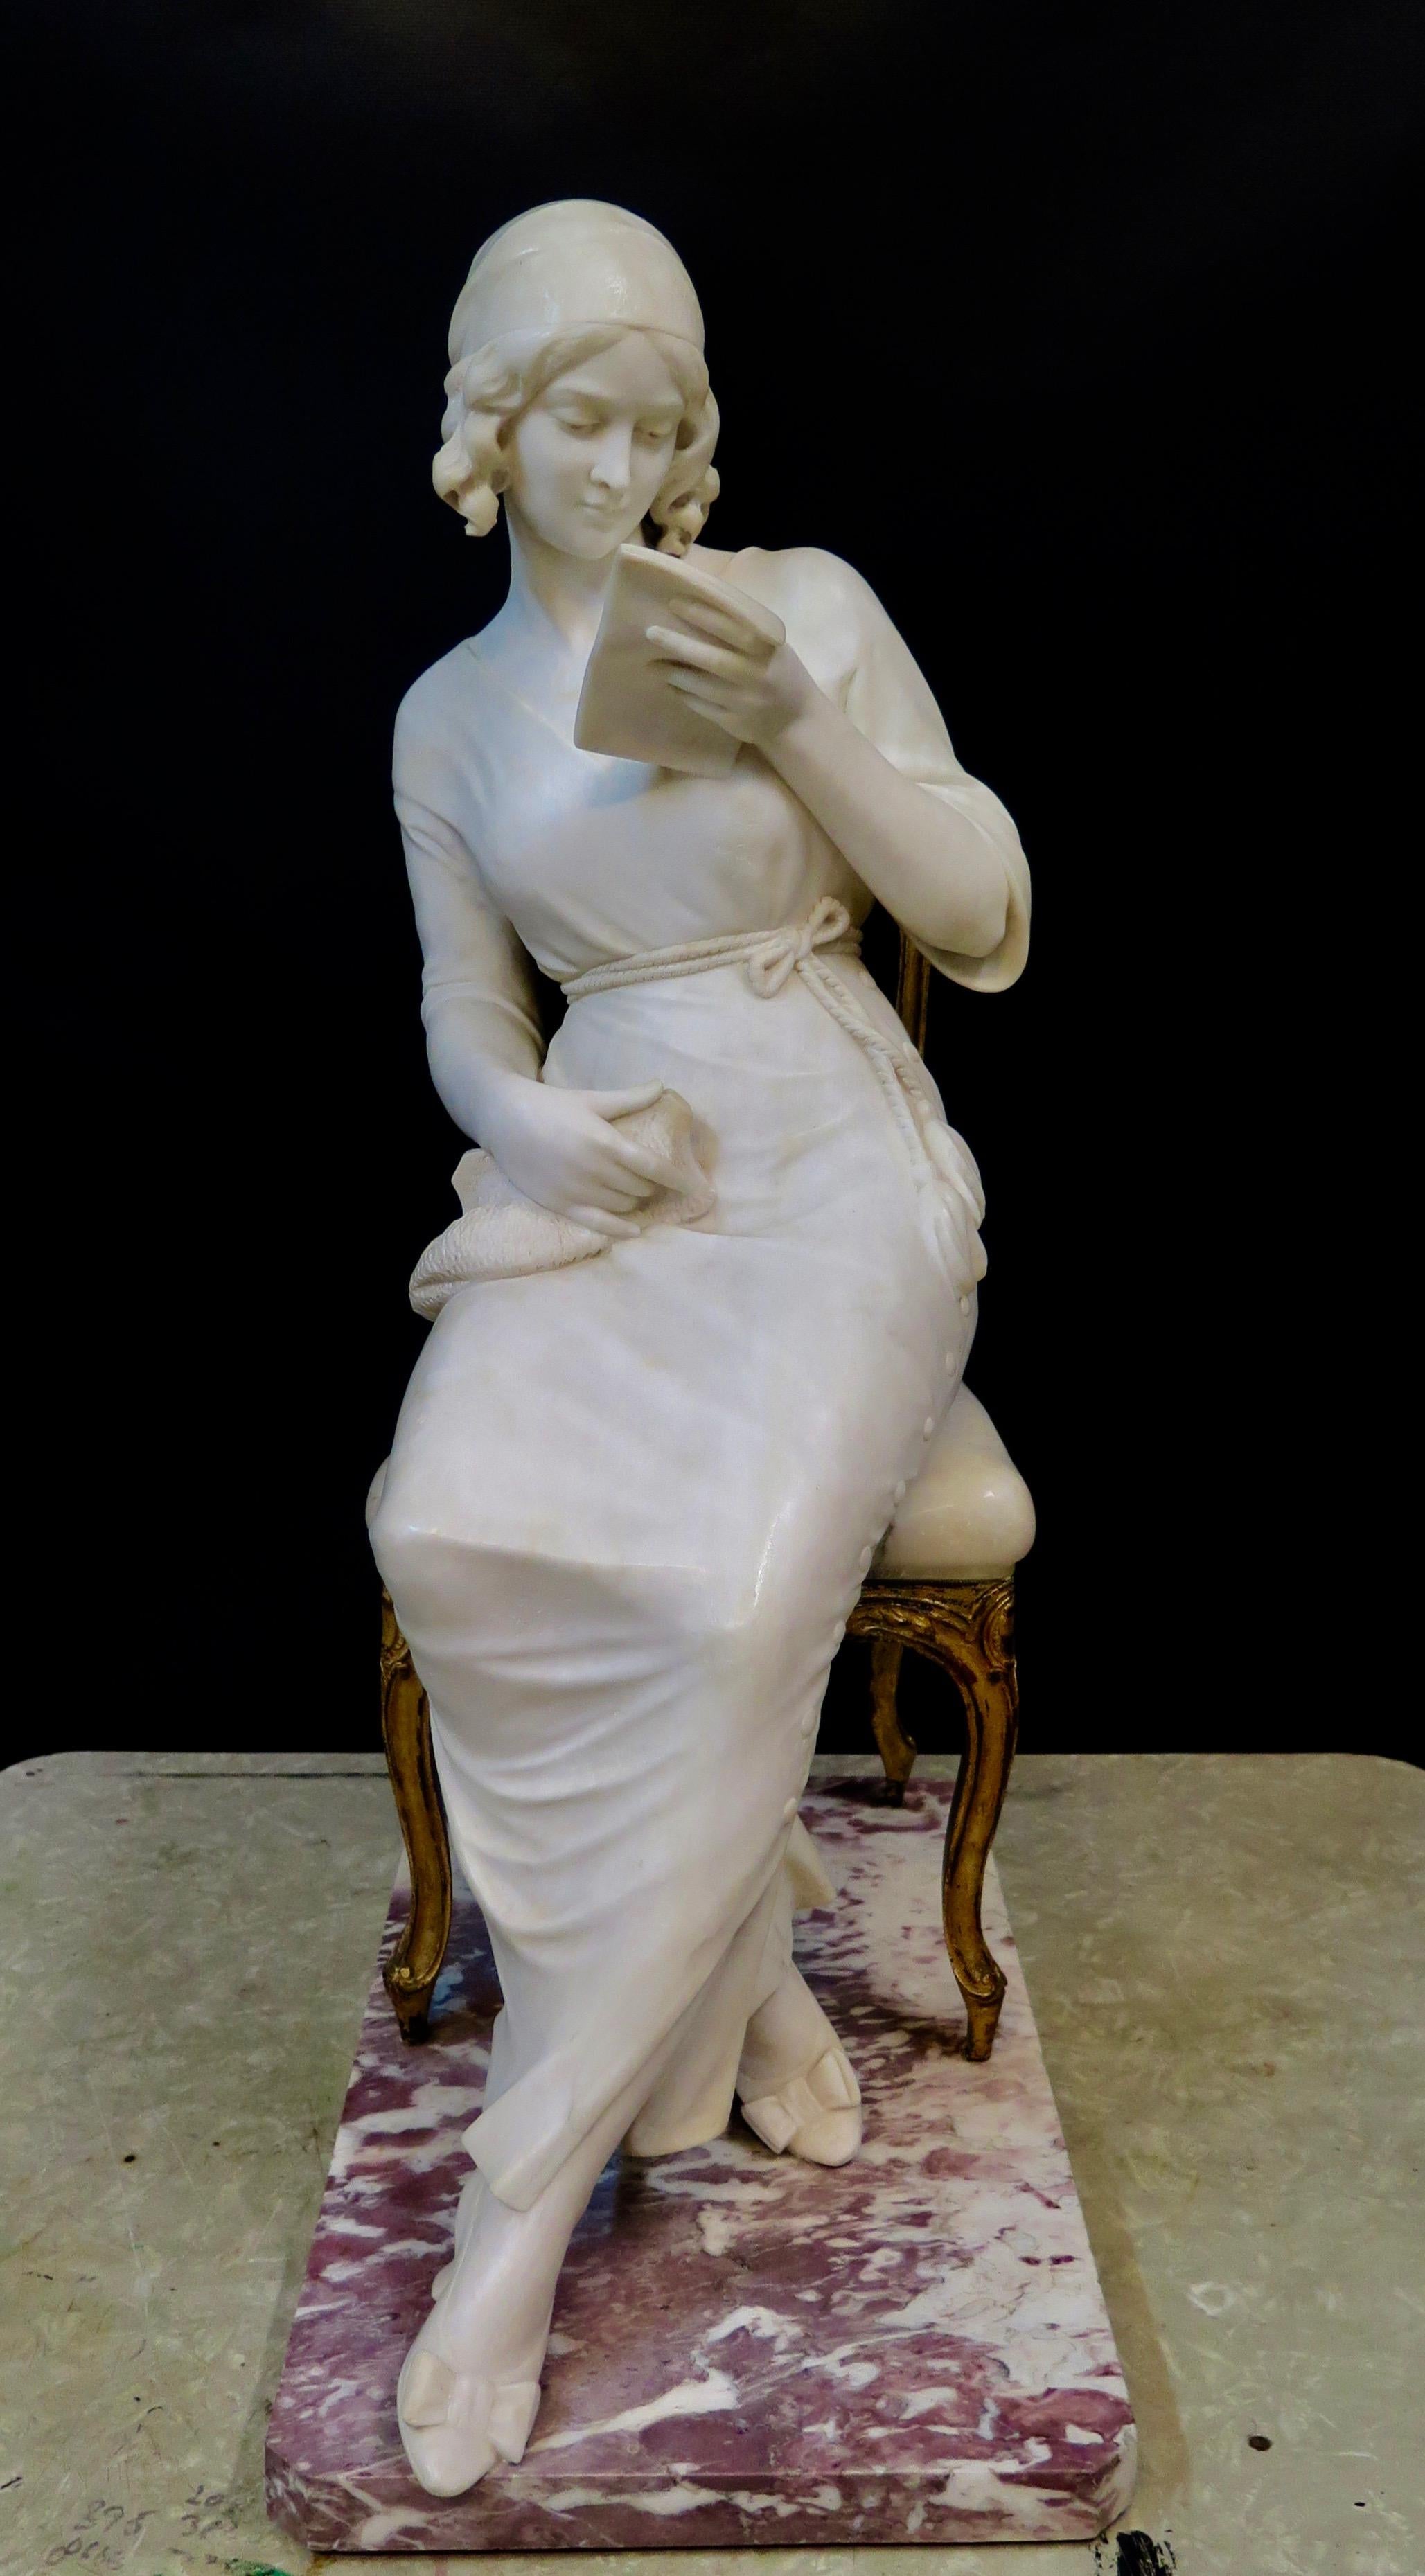 This vintage early 20th century hand carved marble sculpture depicts a lovely young lady dressed in fashionable attire of the time. The artist, Giuseppi Gambogi, portrays his subject comfortably seated upon a bronze chair reading, what appears to